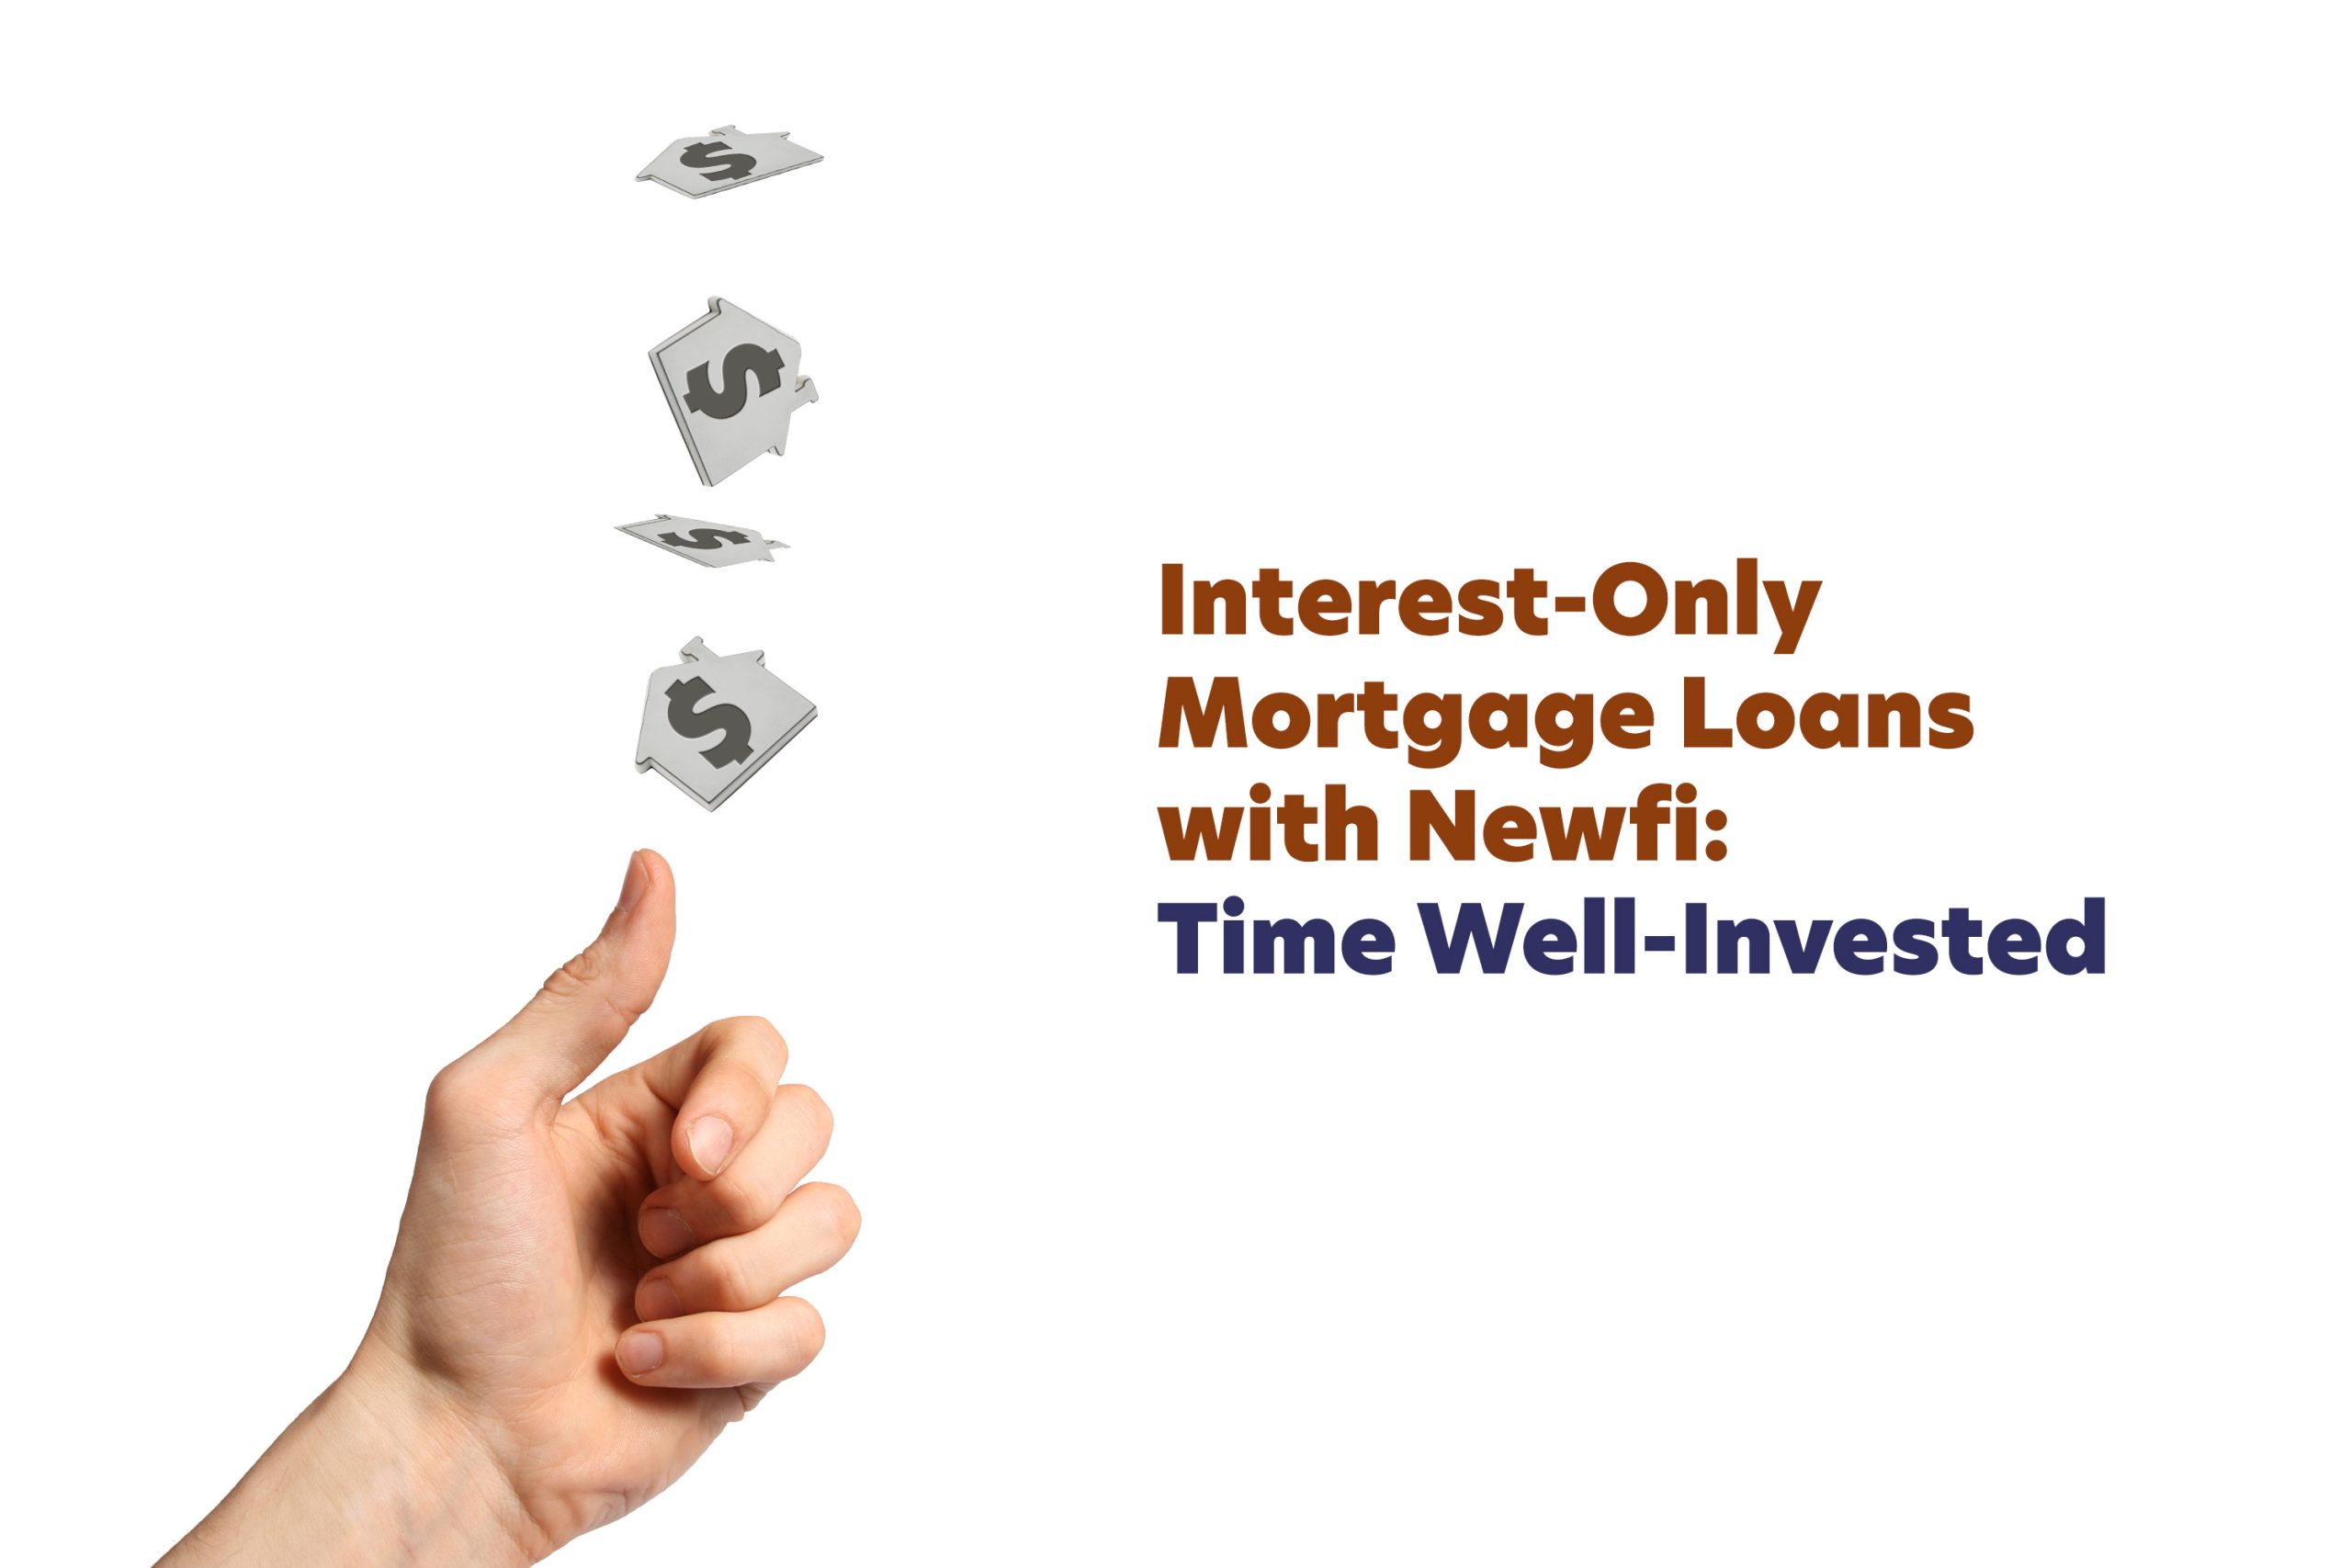 Interest-Only Mortgages: Time Well-Invested